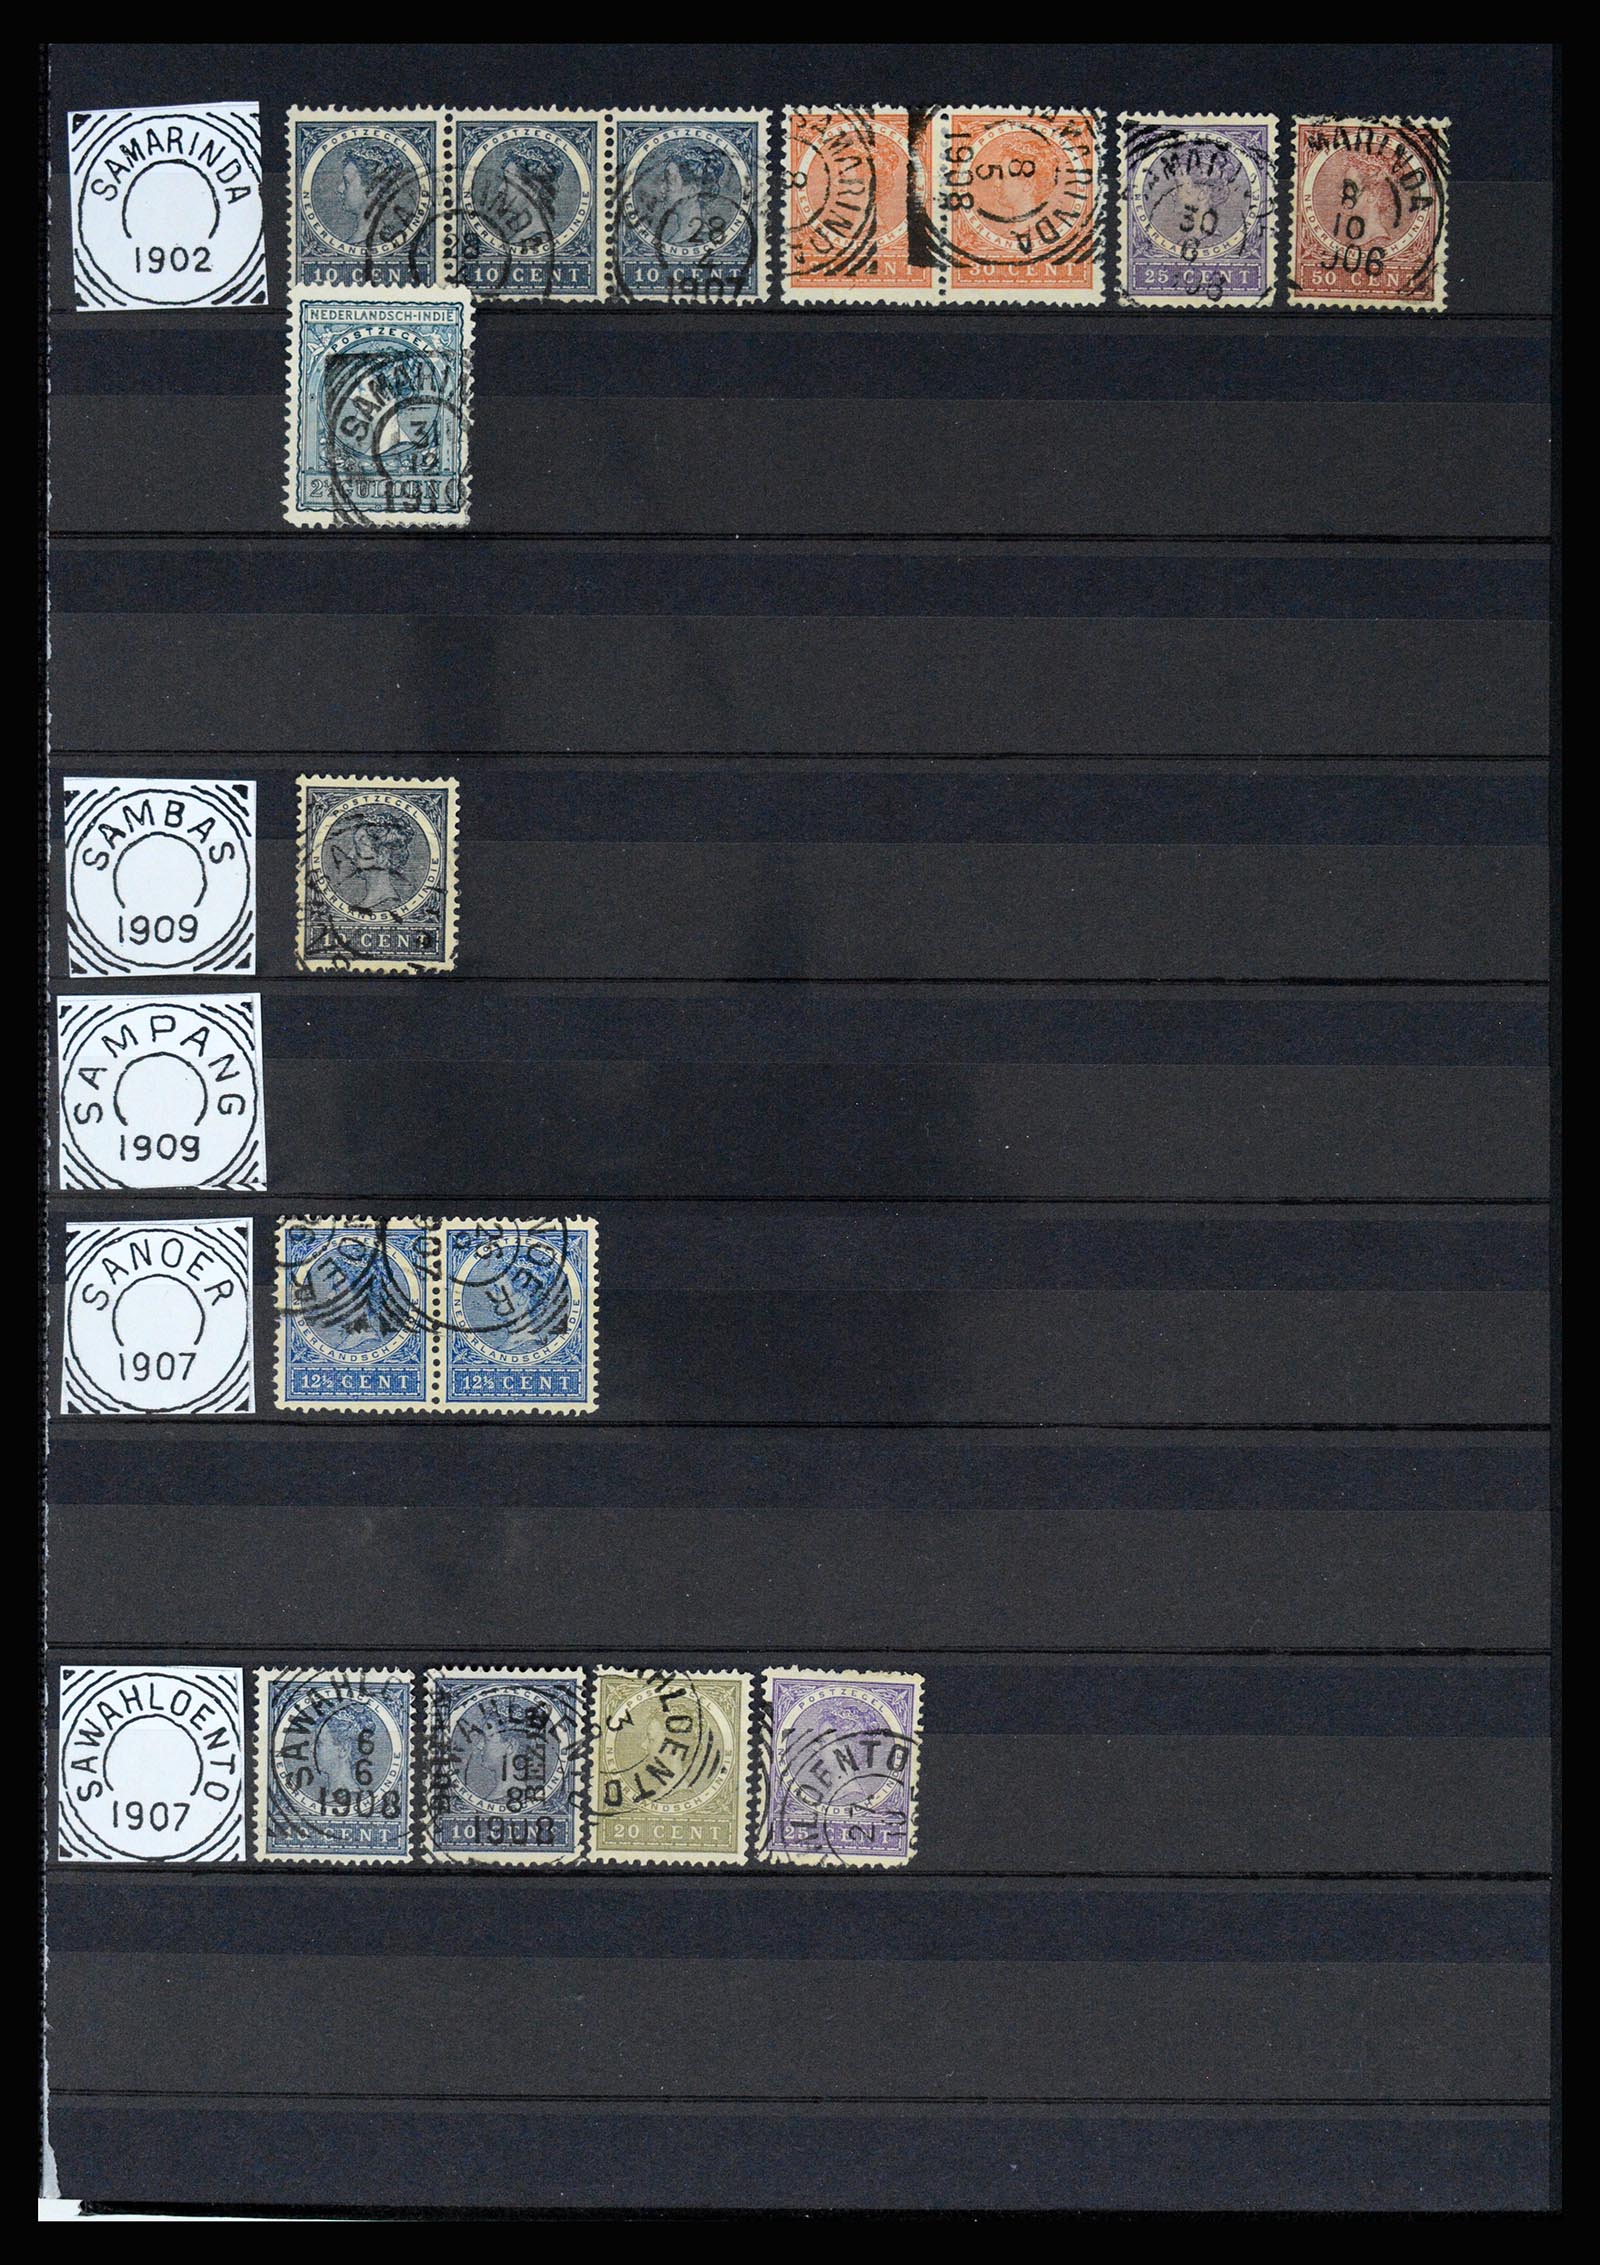 36839 044 - Stamp collection 36839 Dutch east Indies square cancels.